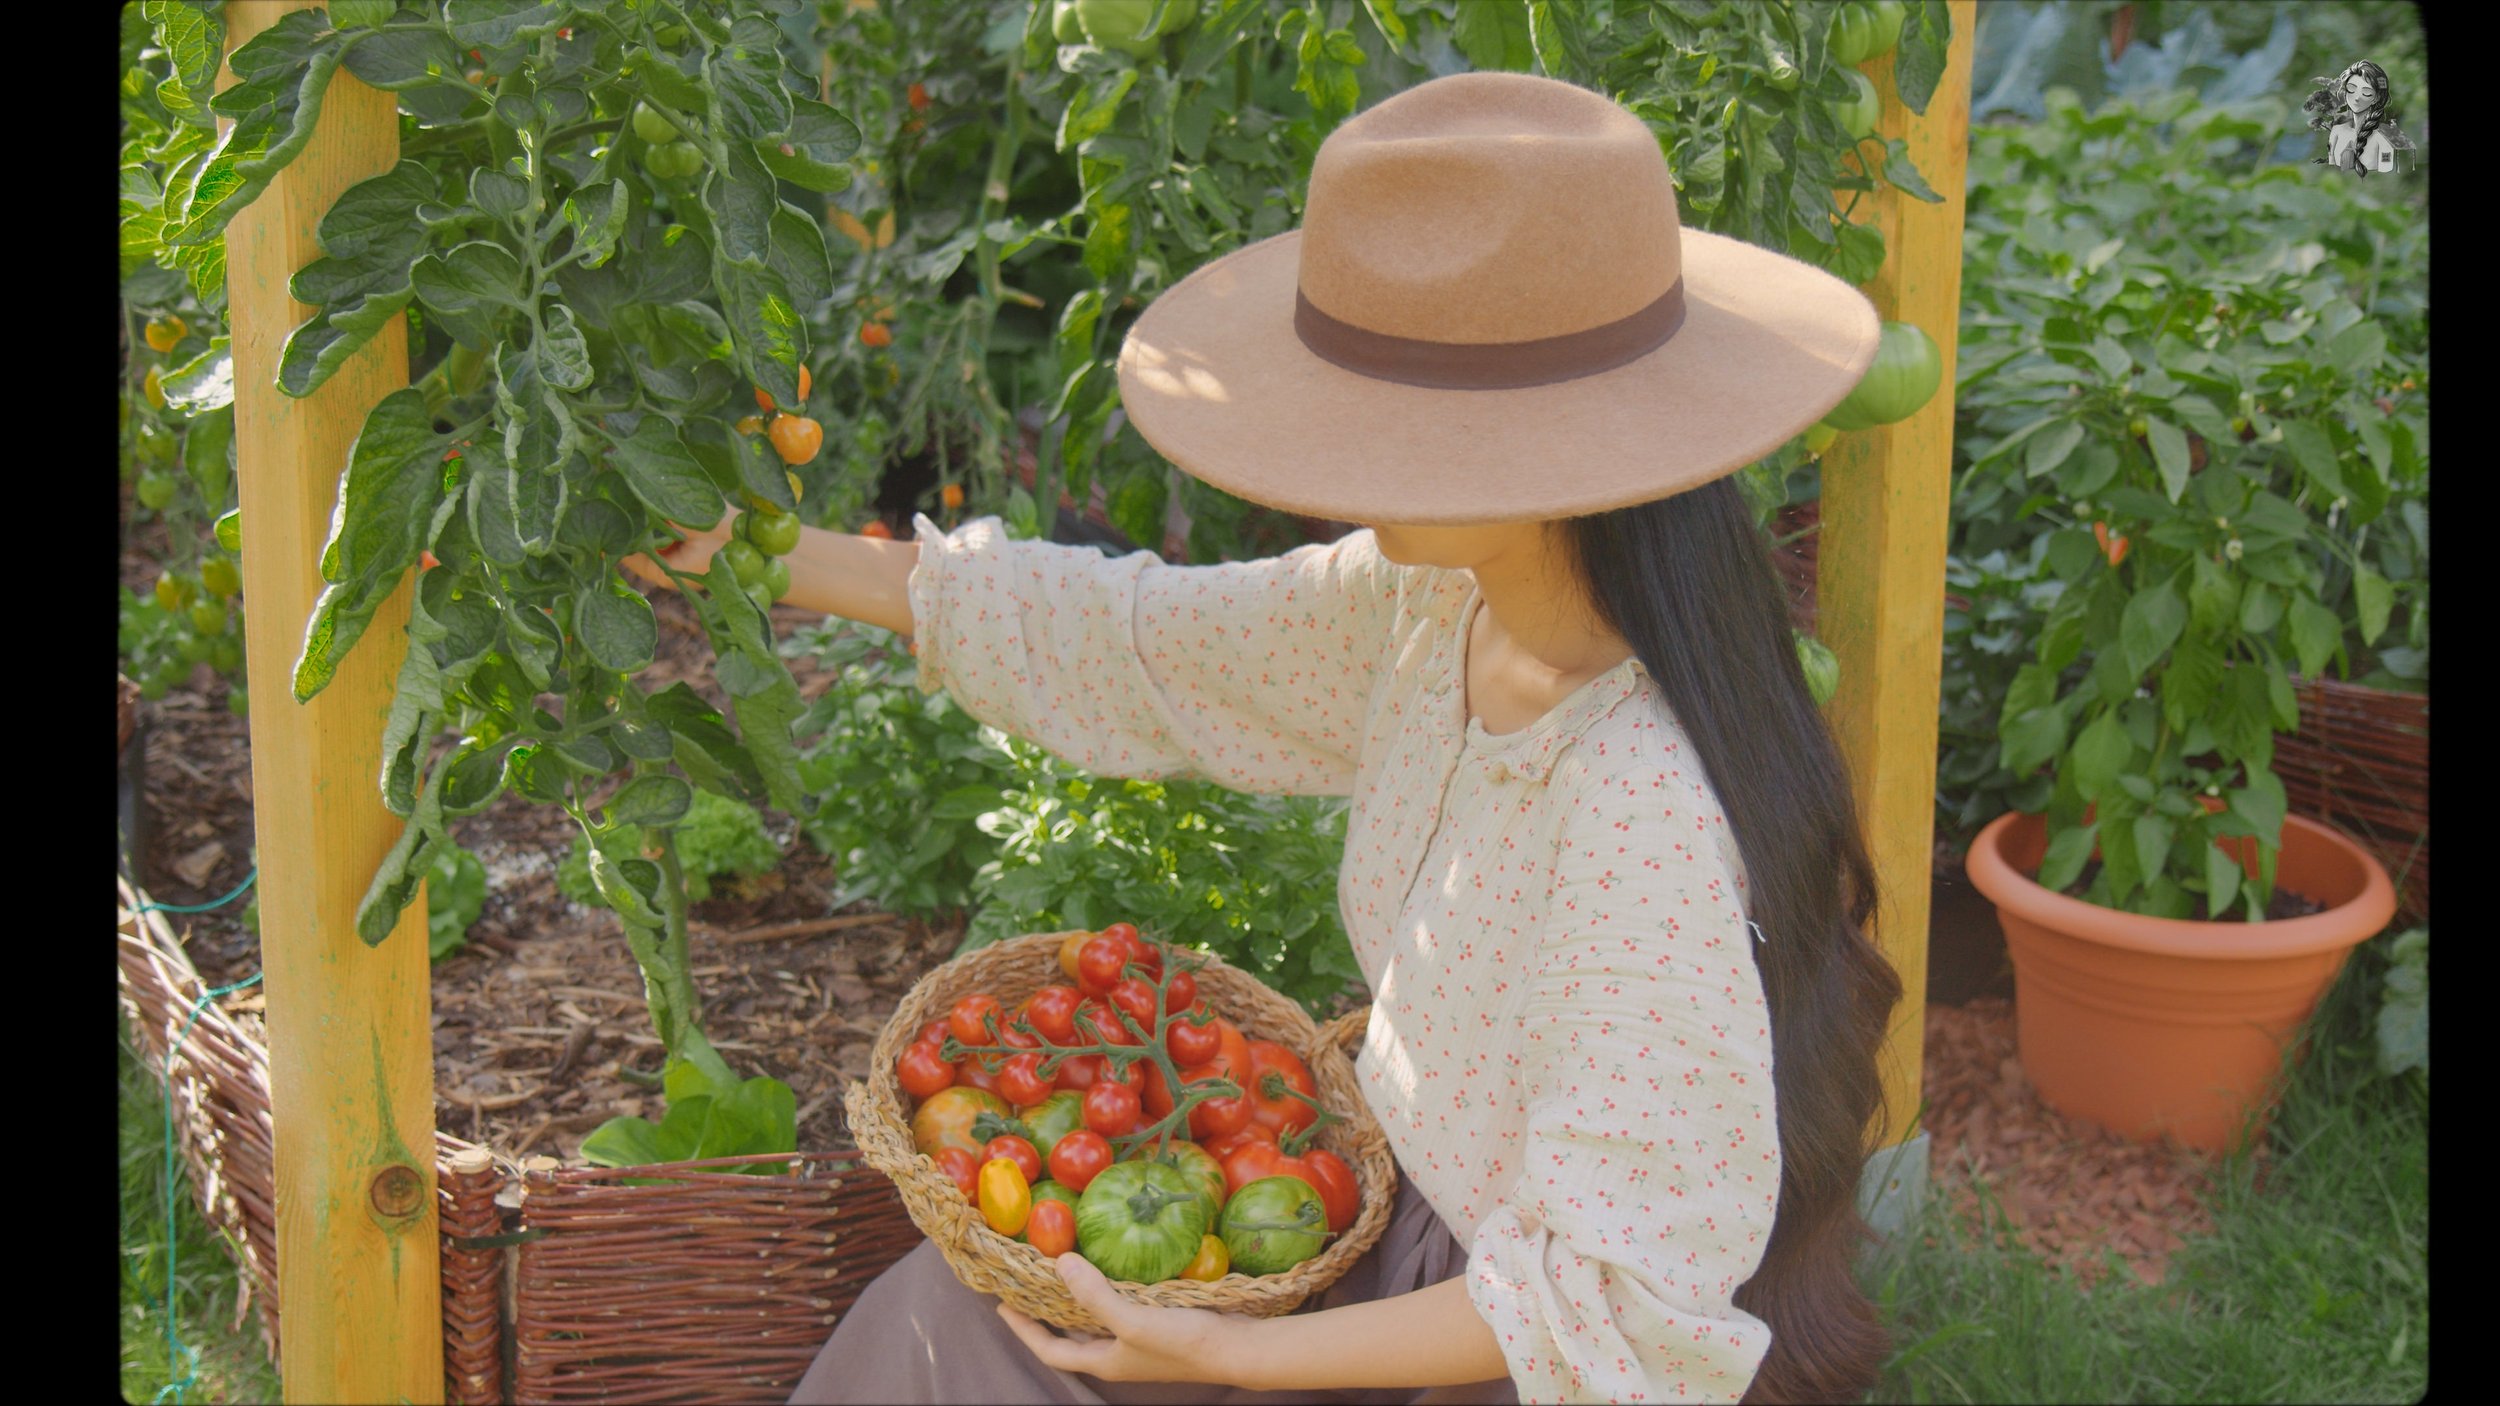 Everything About Growing Tomatoes - Her86m2 _1.240.1.jpg